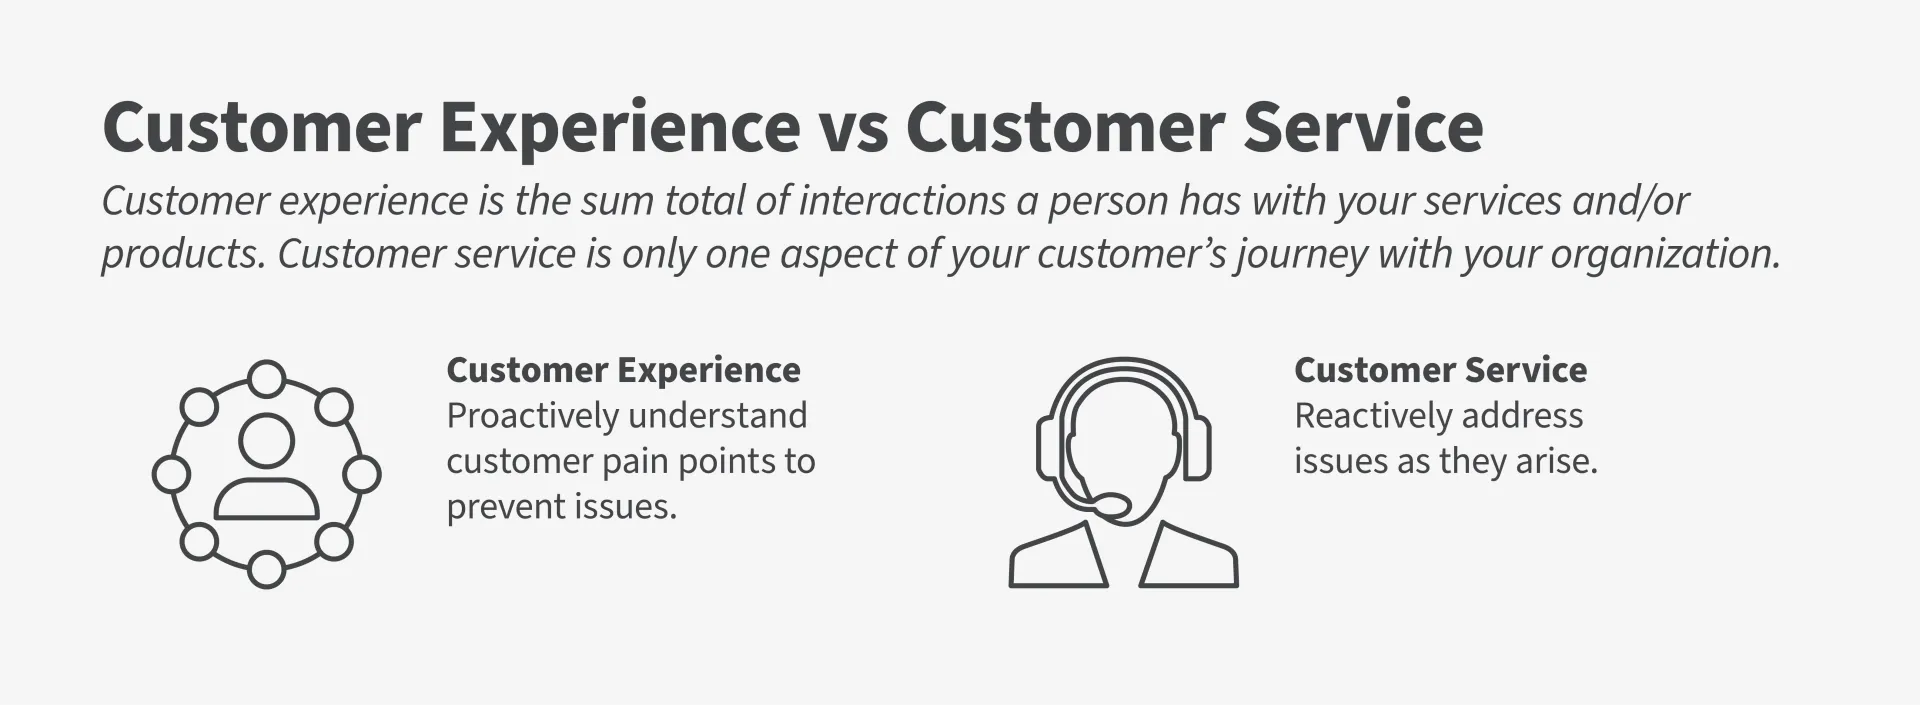 Infographic with two icons showing the difference between customer experience and customer service. 